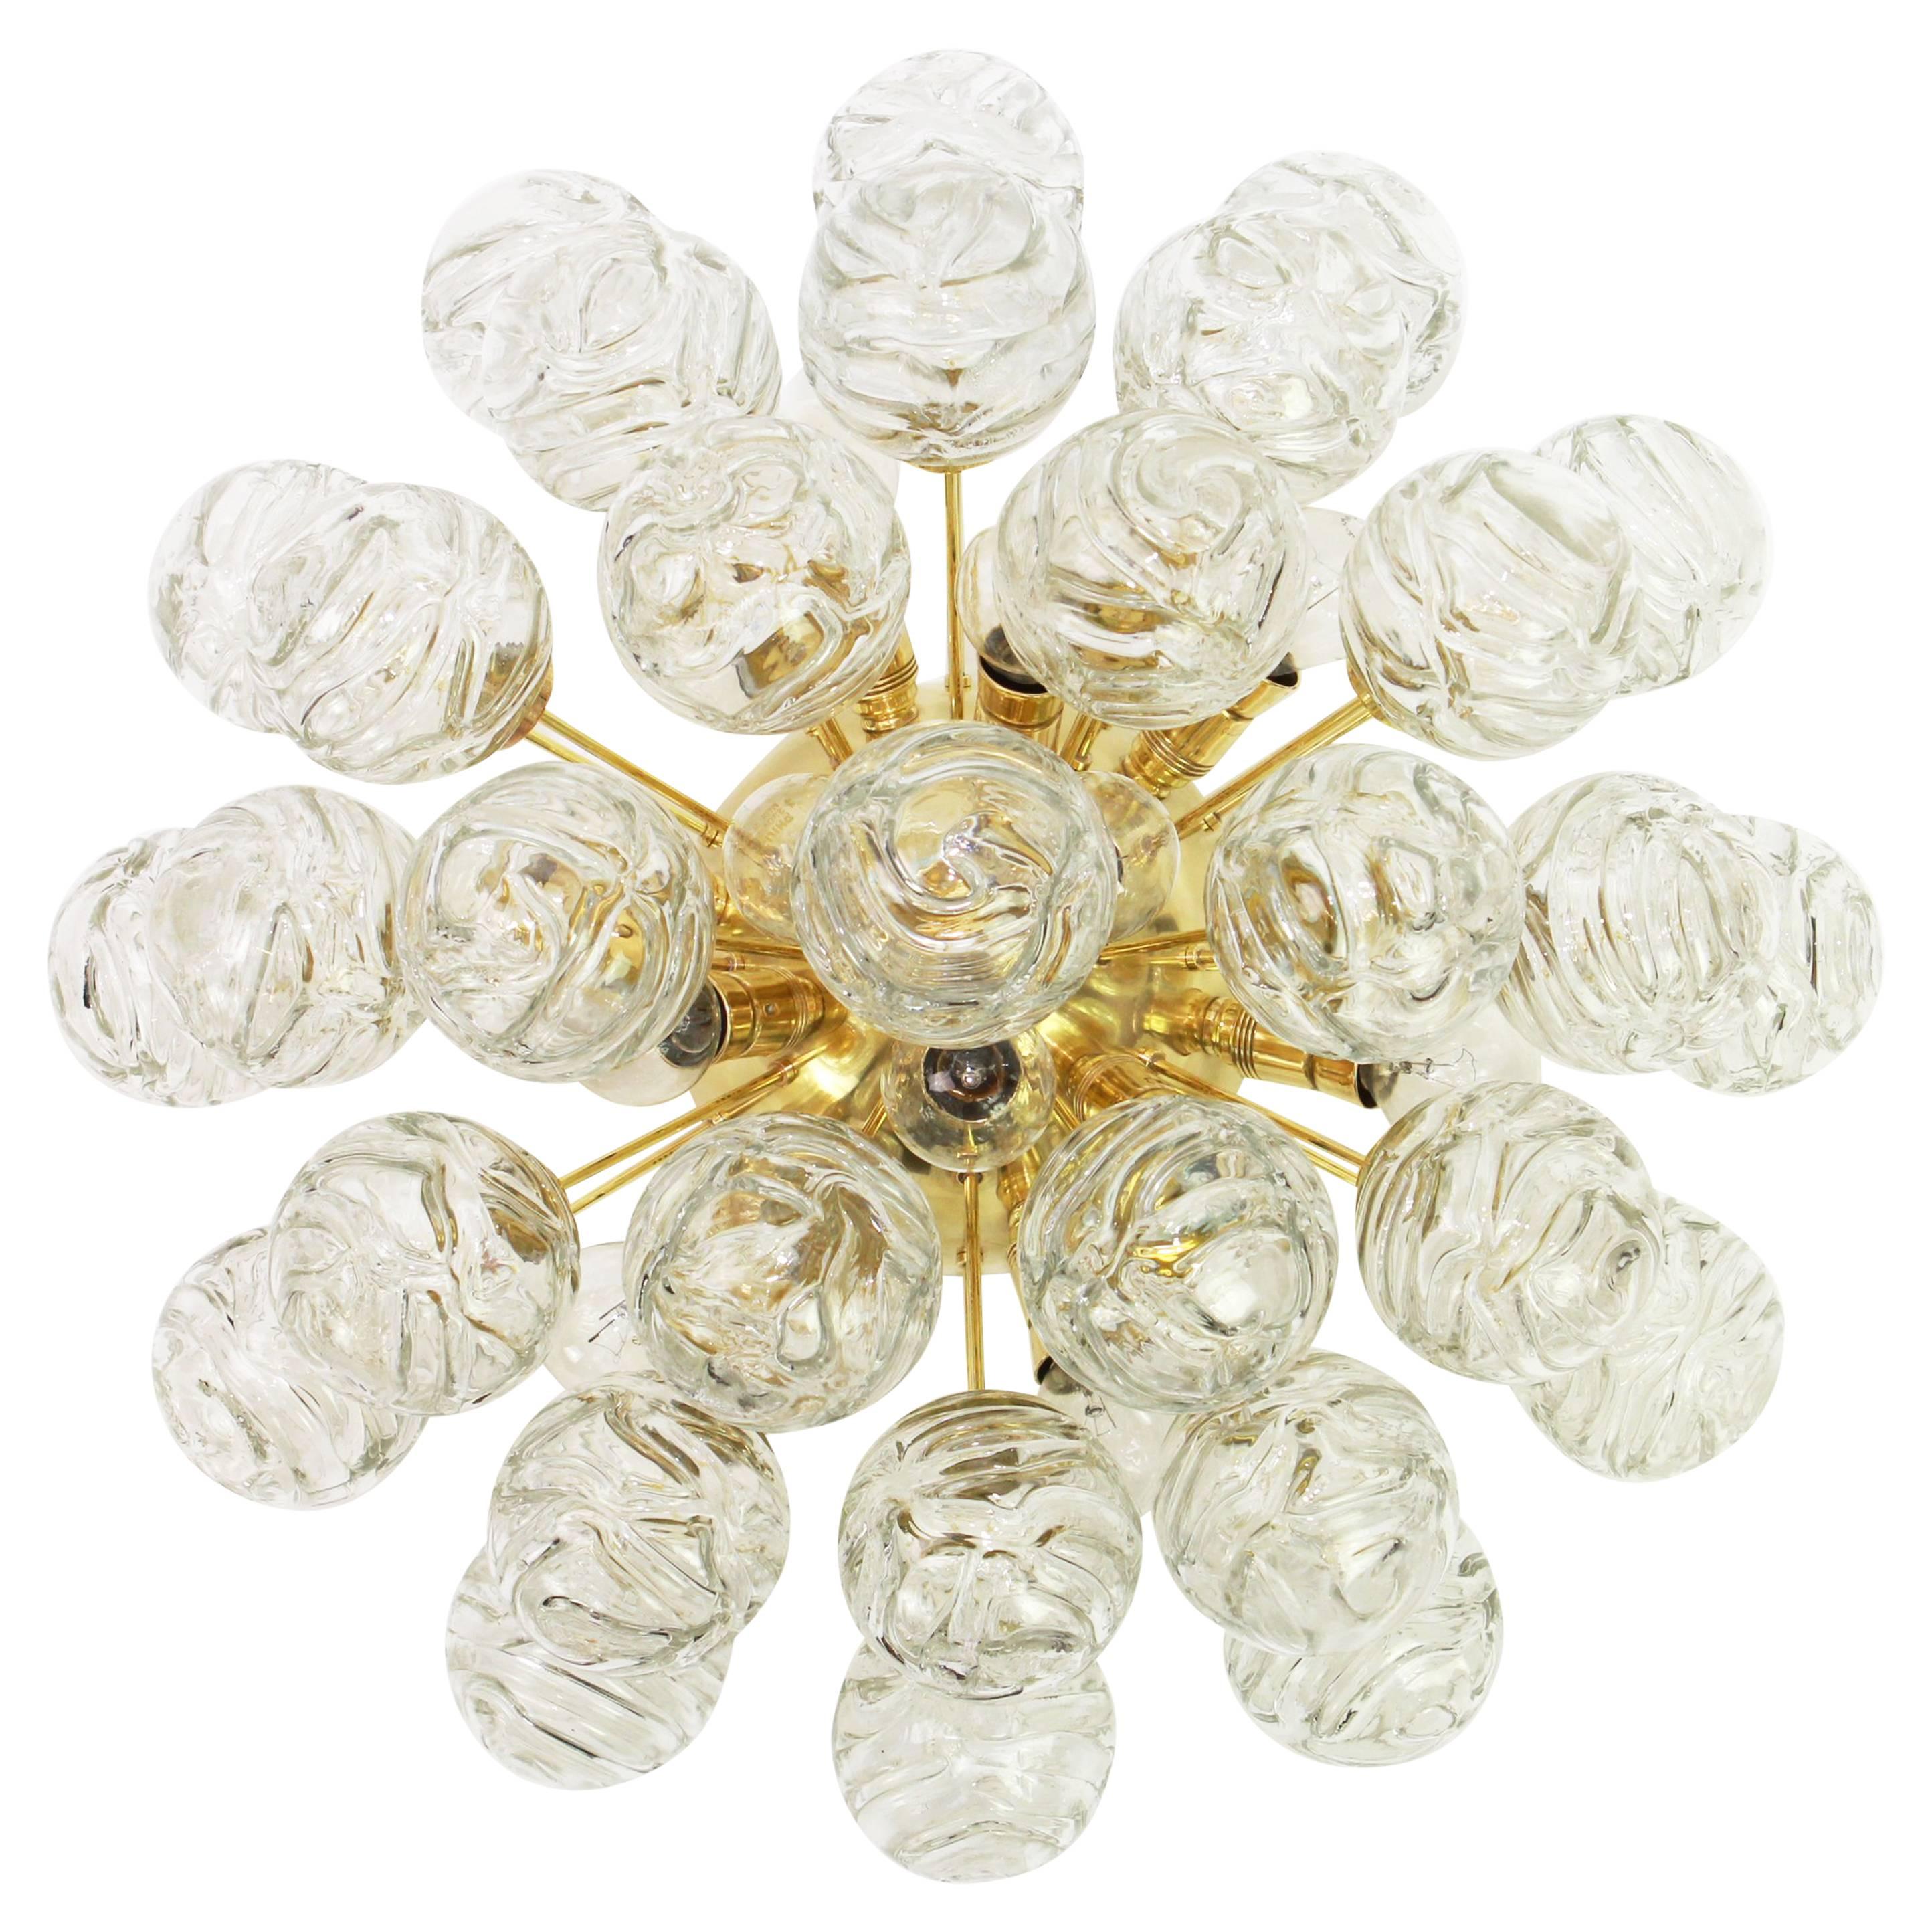 Spectacular Sputnik flush mount with glass snowballs designed by Doria, Germany, 1970s
All glass balls are in good condition.
It needs 12 small size bulbs (E-14 bulbs) up to 40 watts each.
Light bulbs are not included. It is possible to install